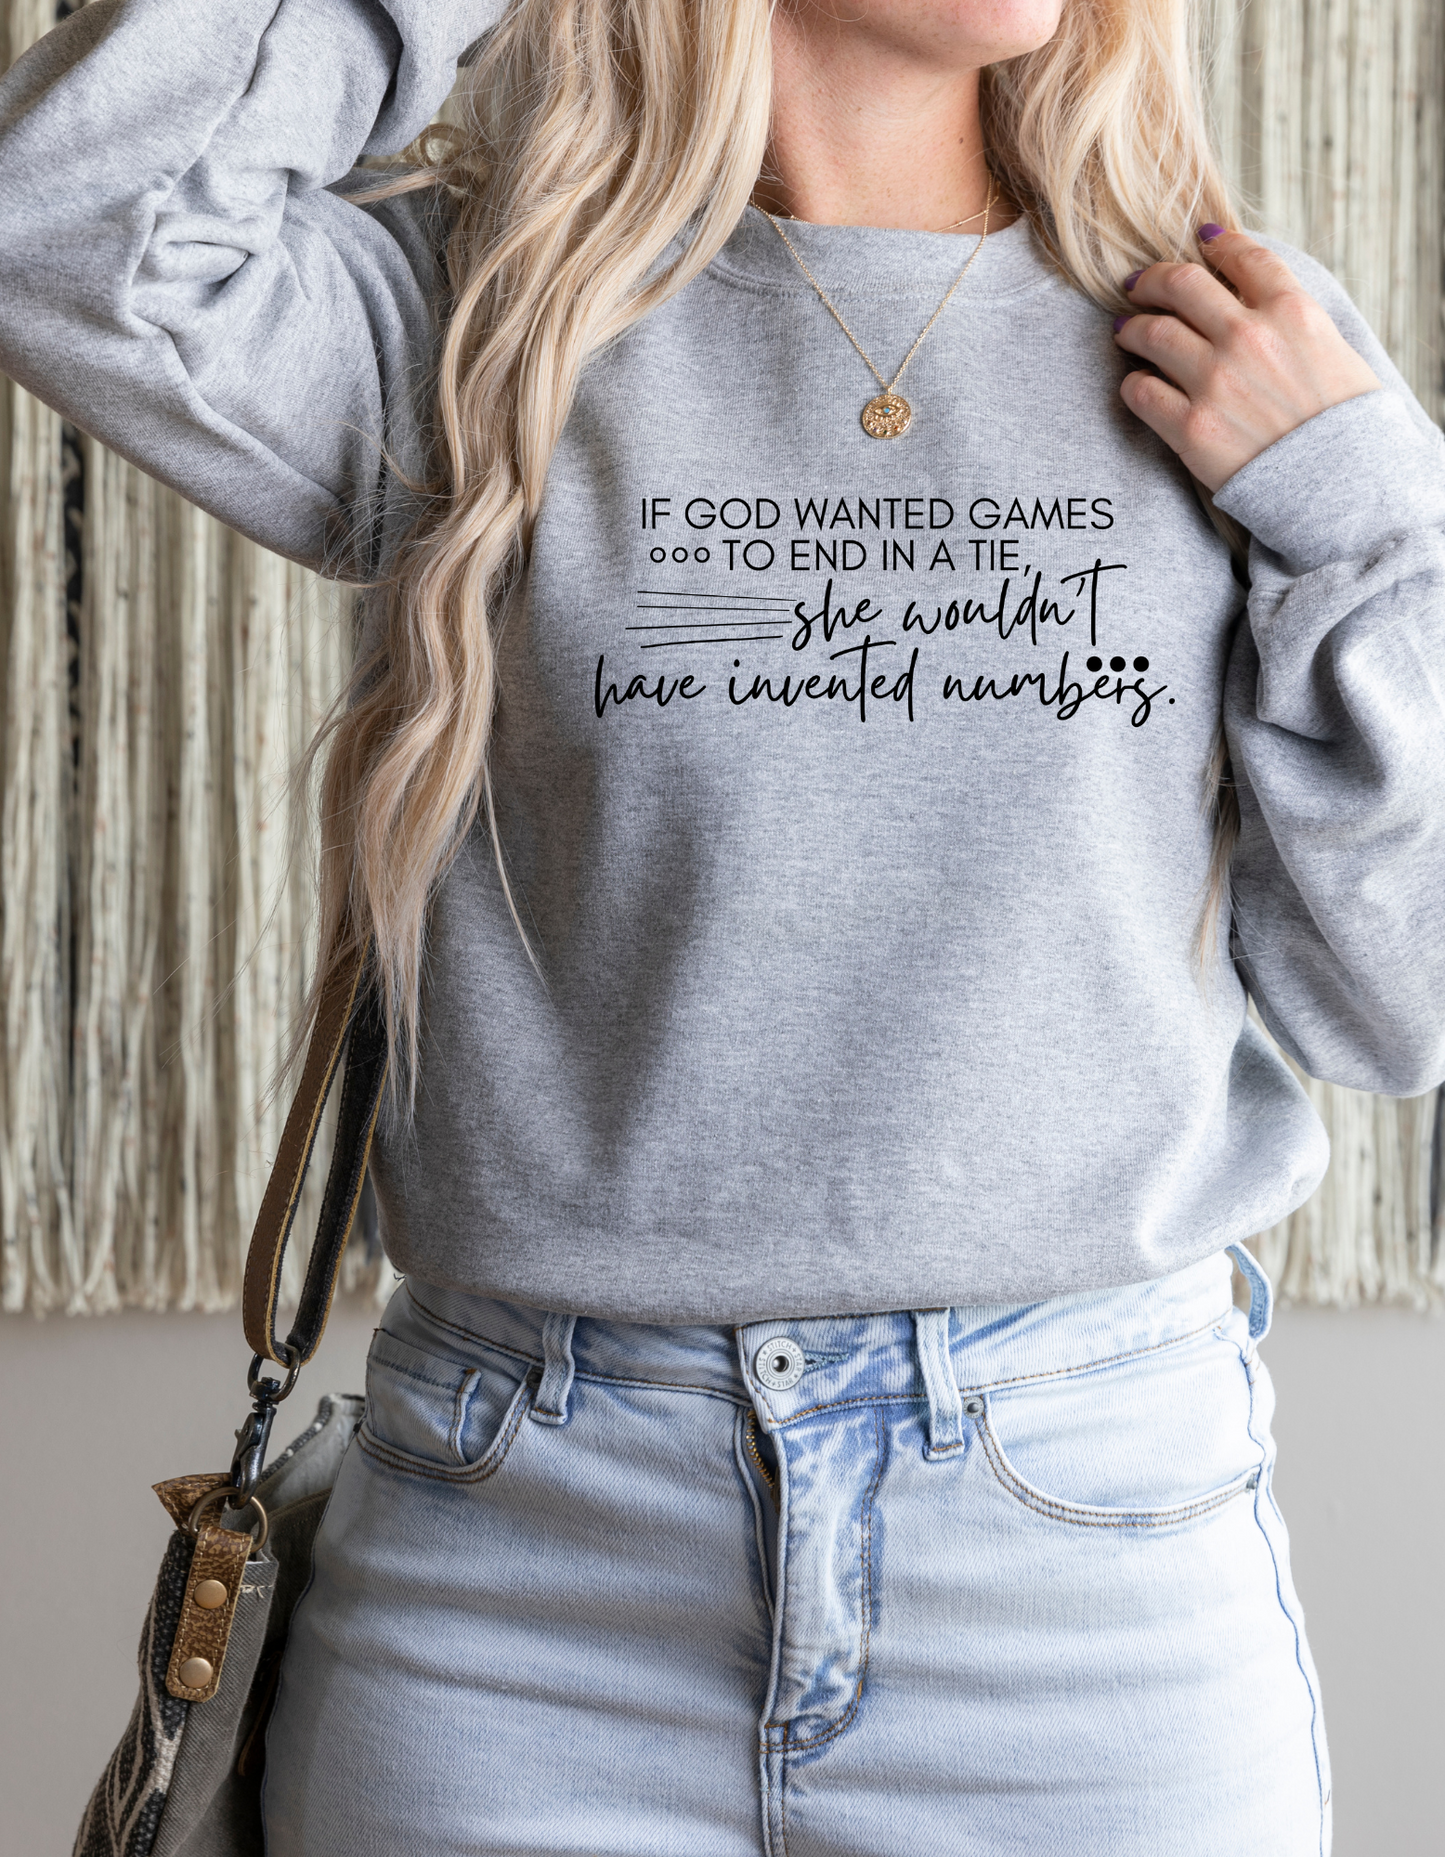 She Wouldn't Have Invented Numbers Crew Sweatshirt